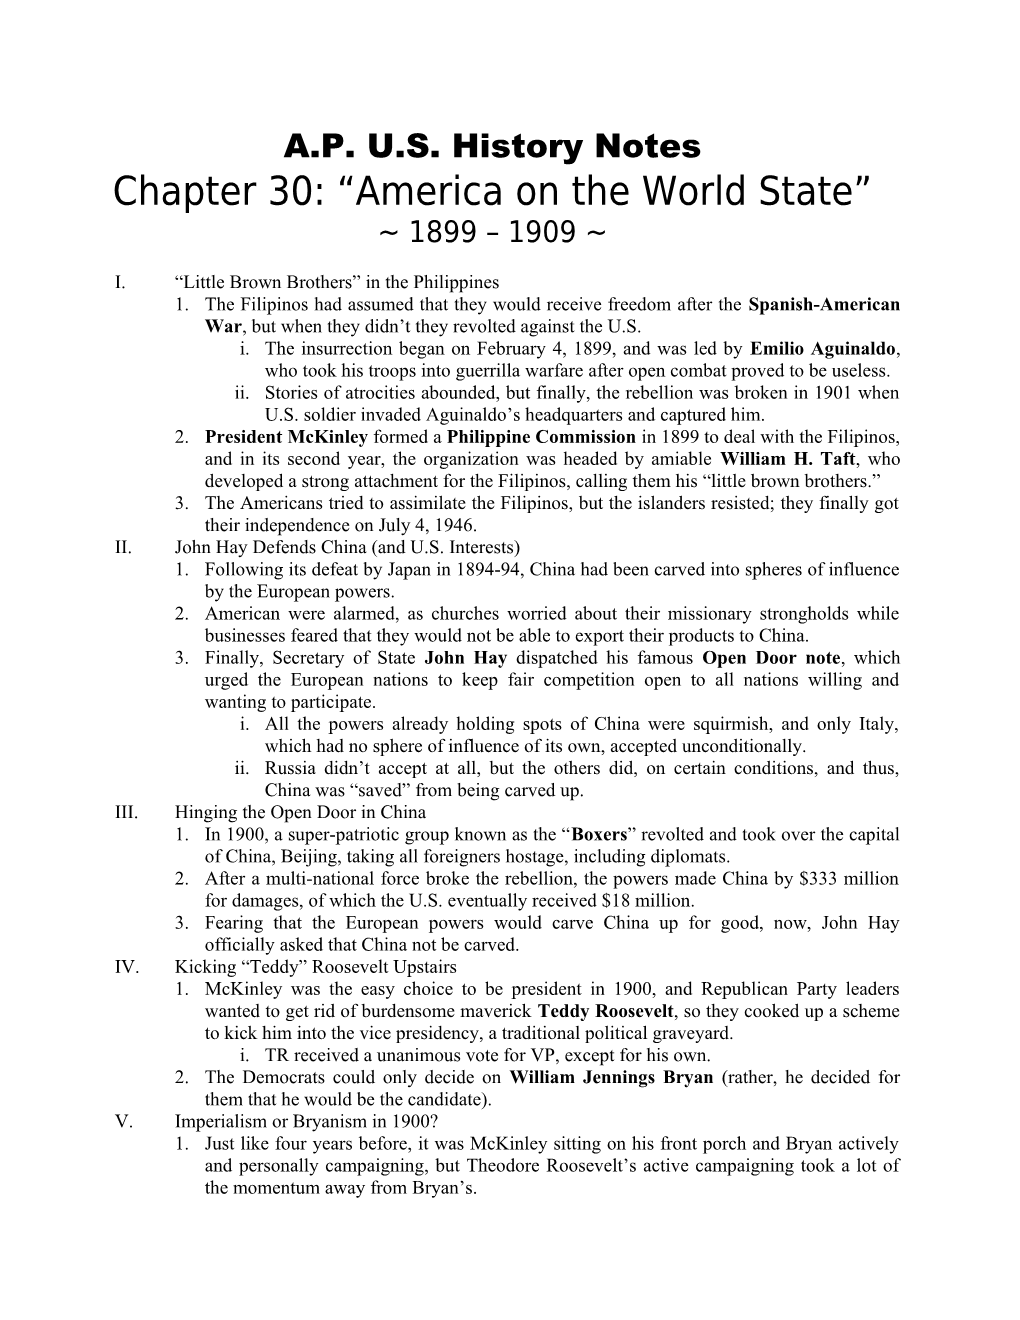 Chapter 30: America on the World State